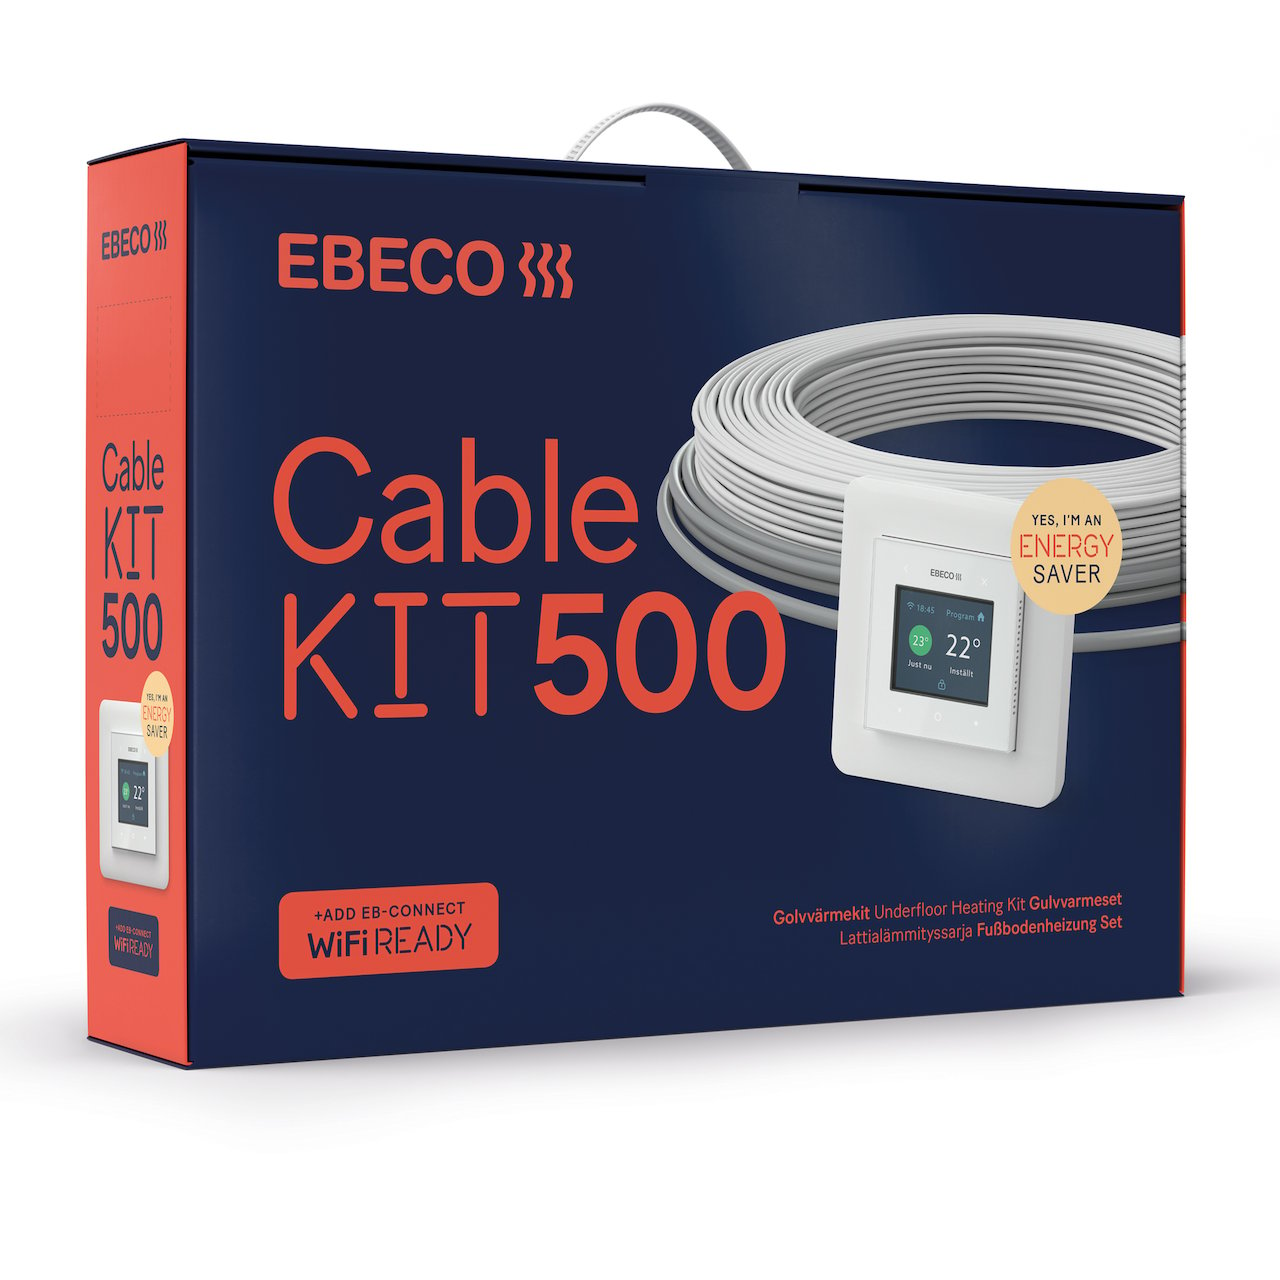 EBECO CABLE KIT 500 155M 1710W